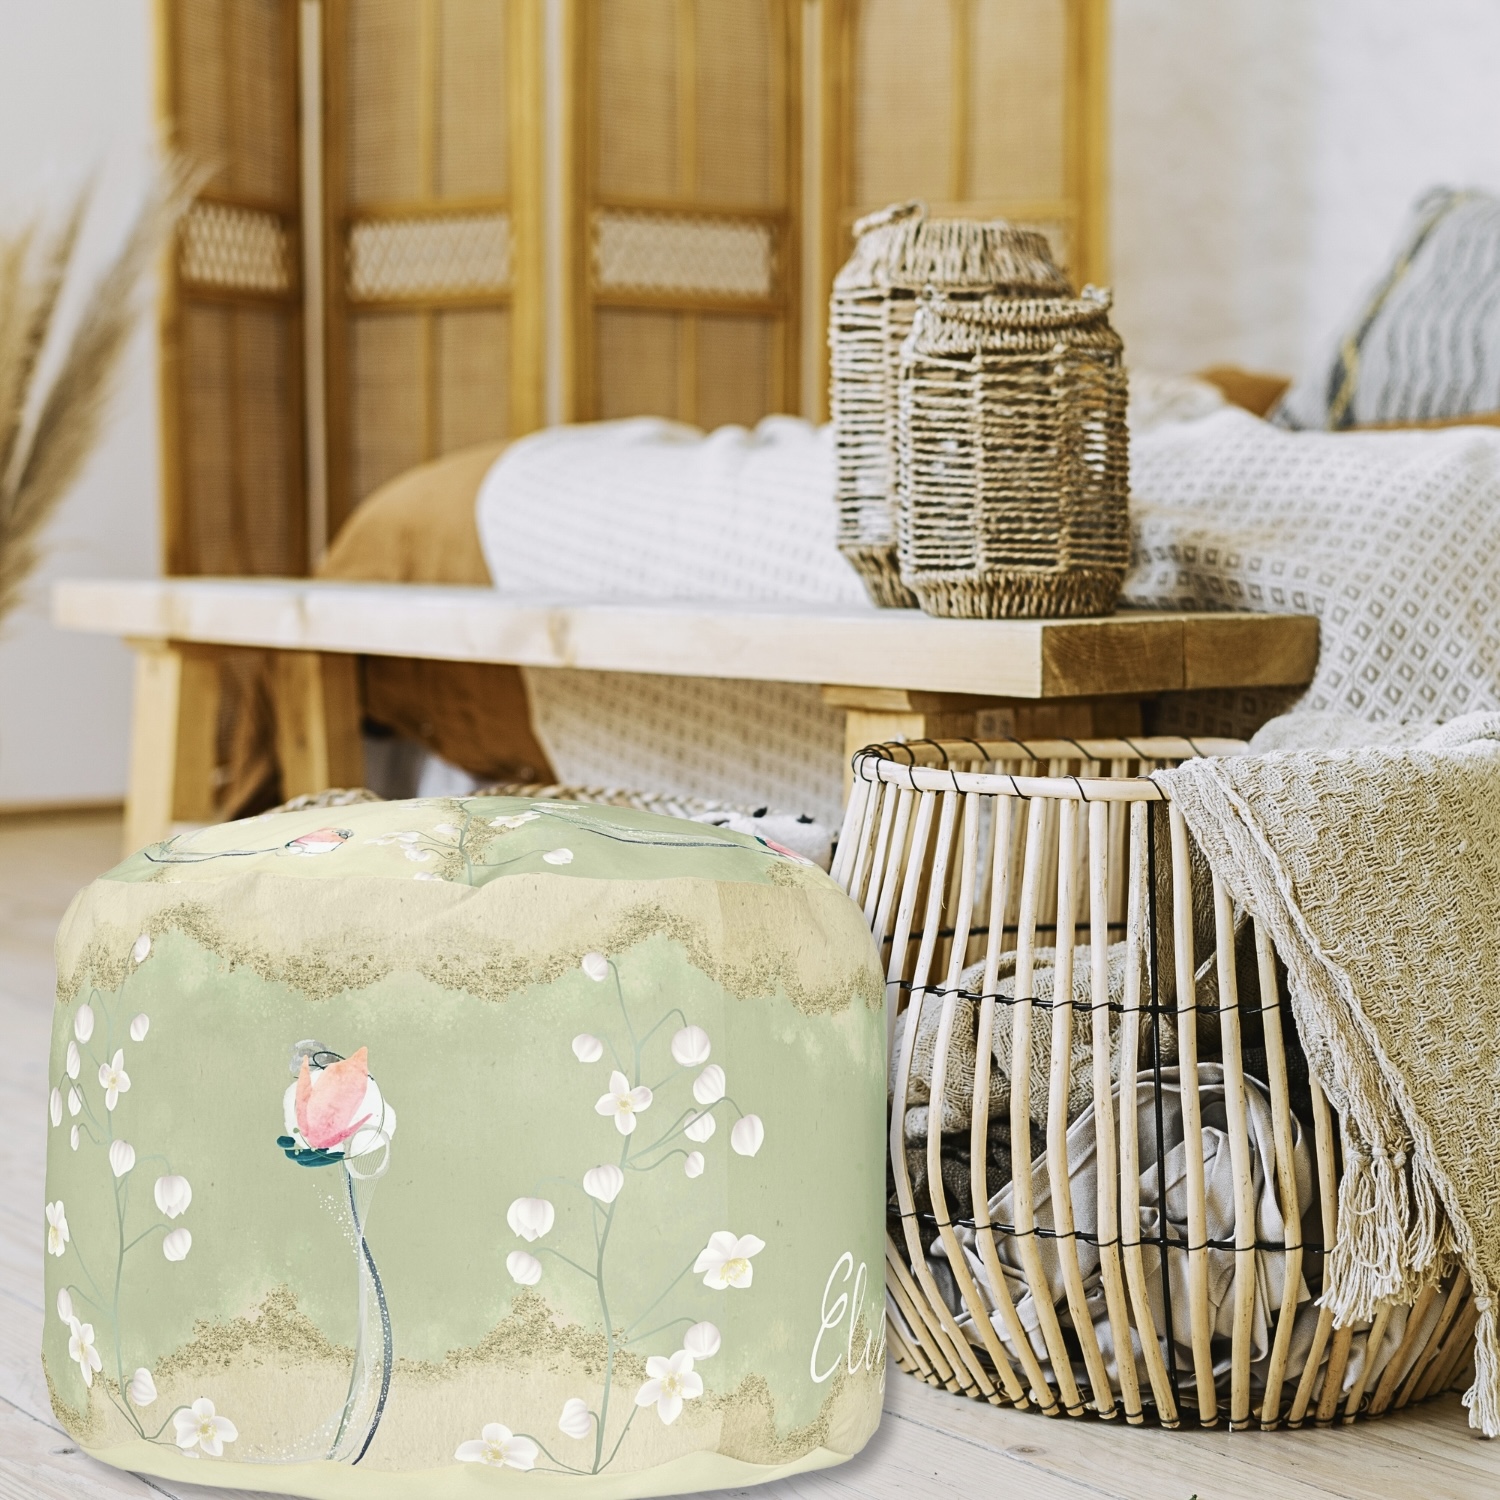 Custom moss green personalized pouf featuring a soothing moss green color with a personalized touch. The pouf offers a comfortable and stylish seating option, perfect for adding a personalized accent to any space.